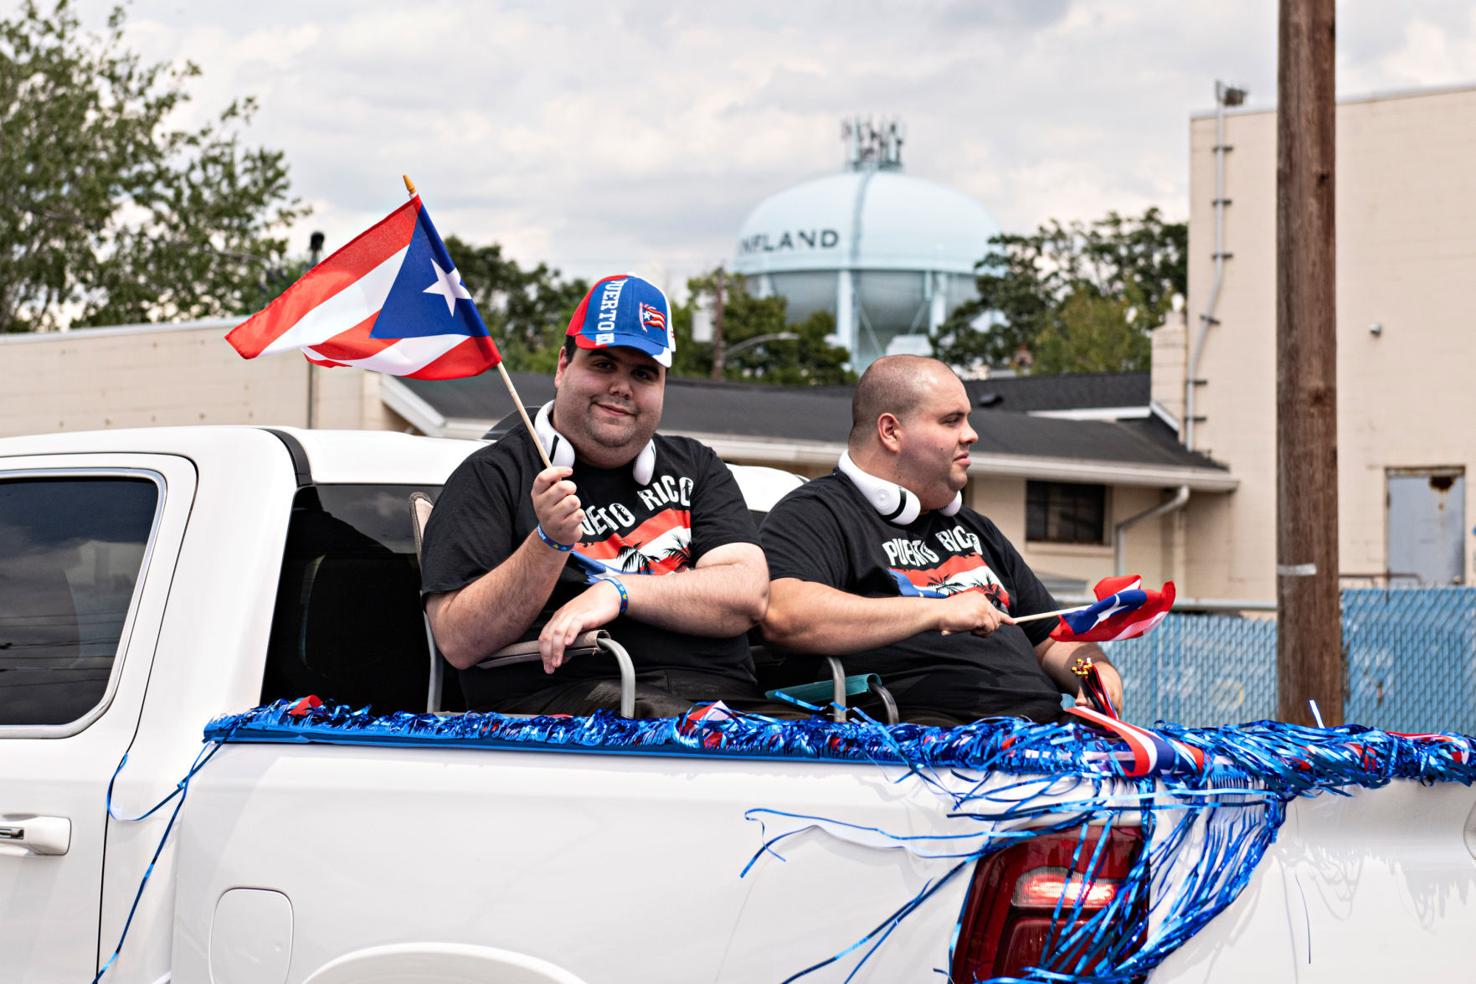 Puerto Rican heritage celebrated in packed Vineland parade